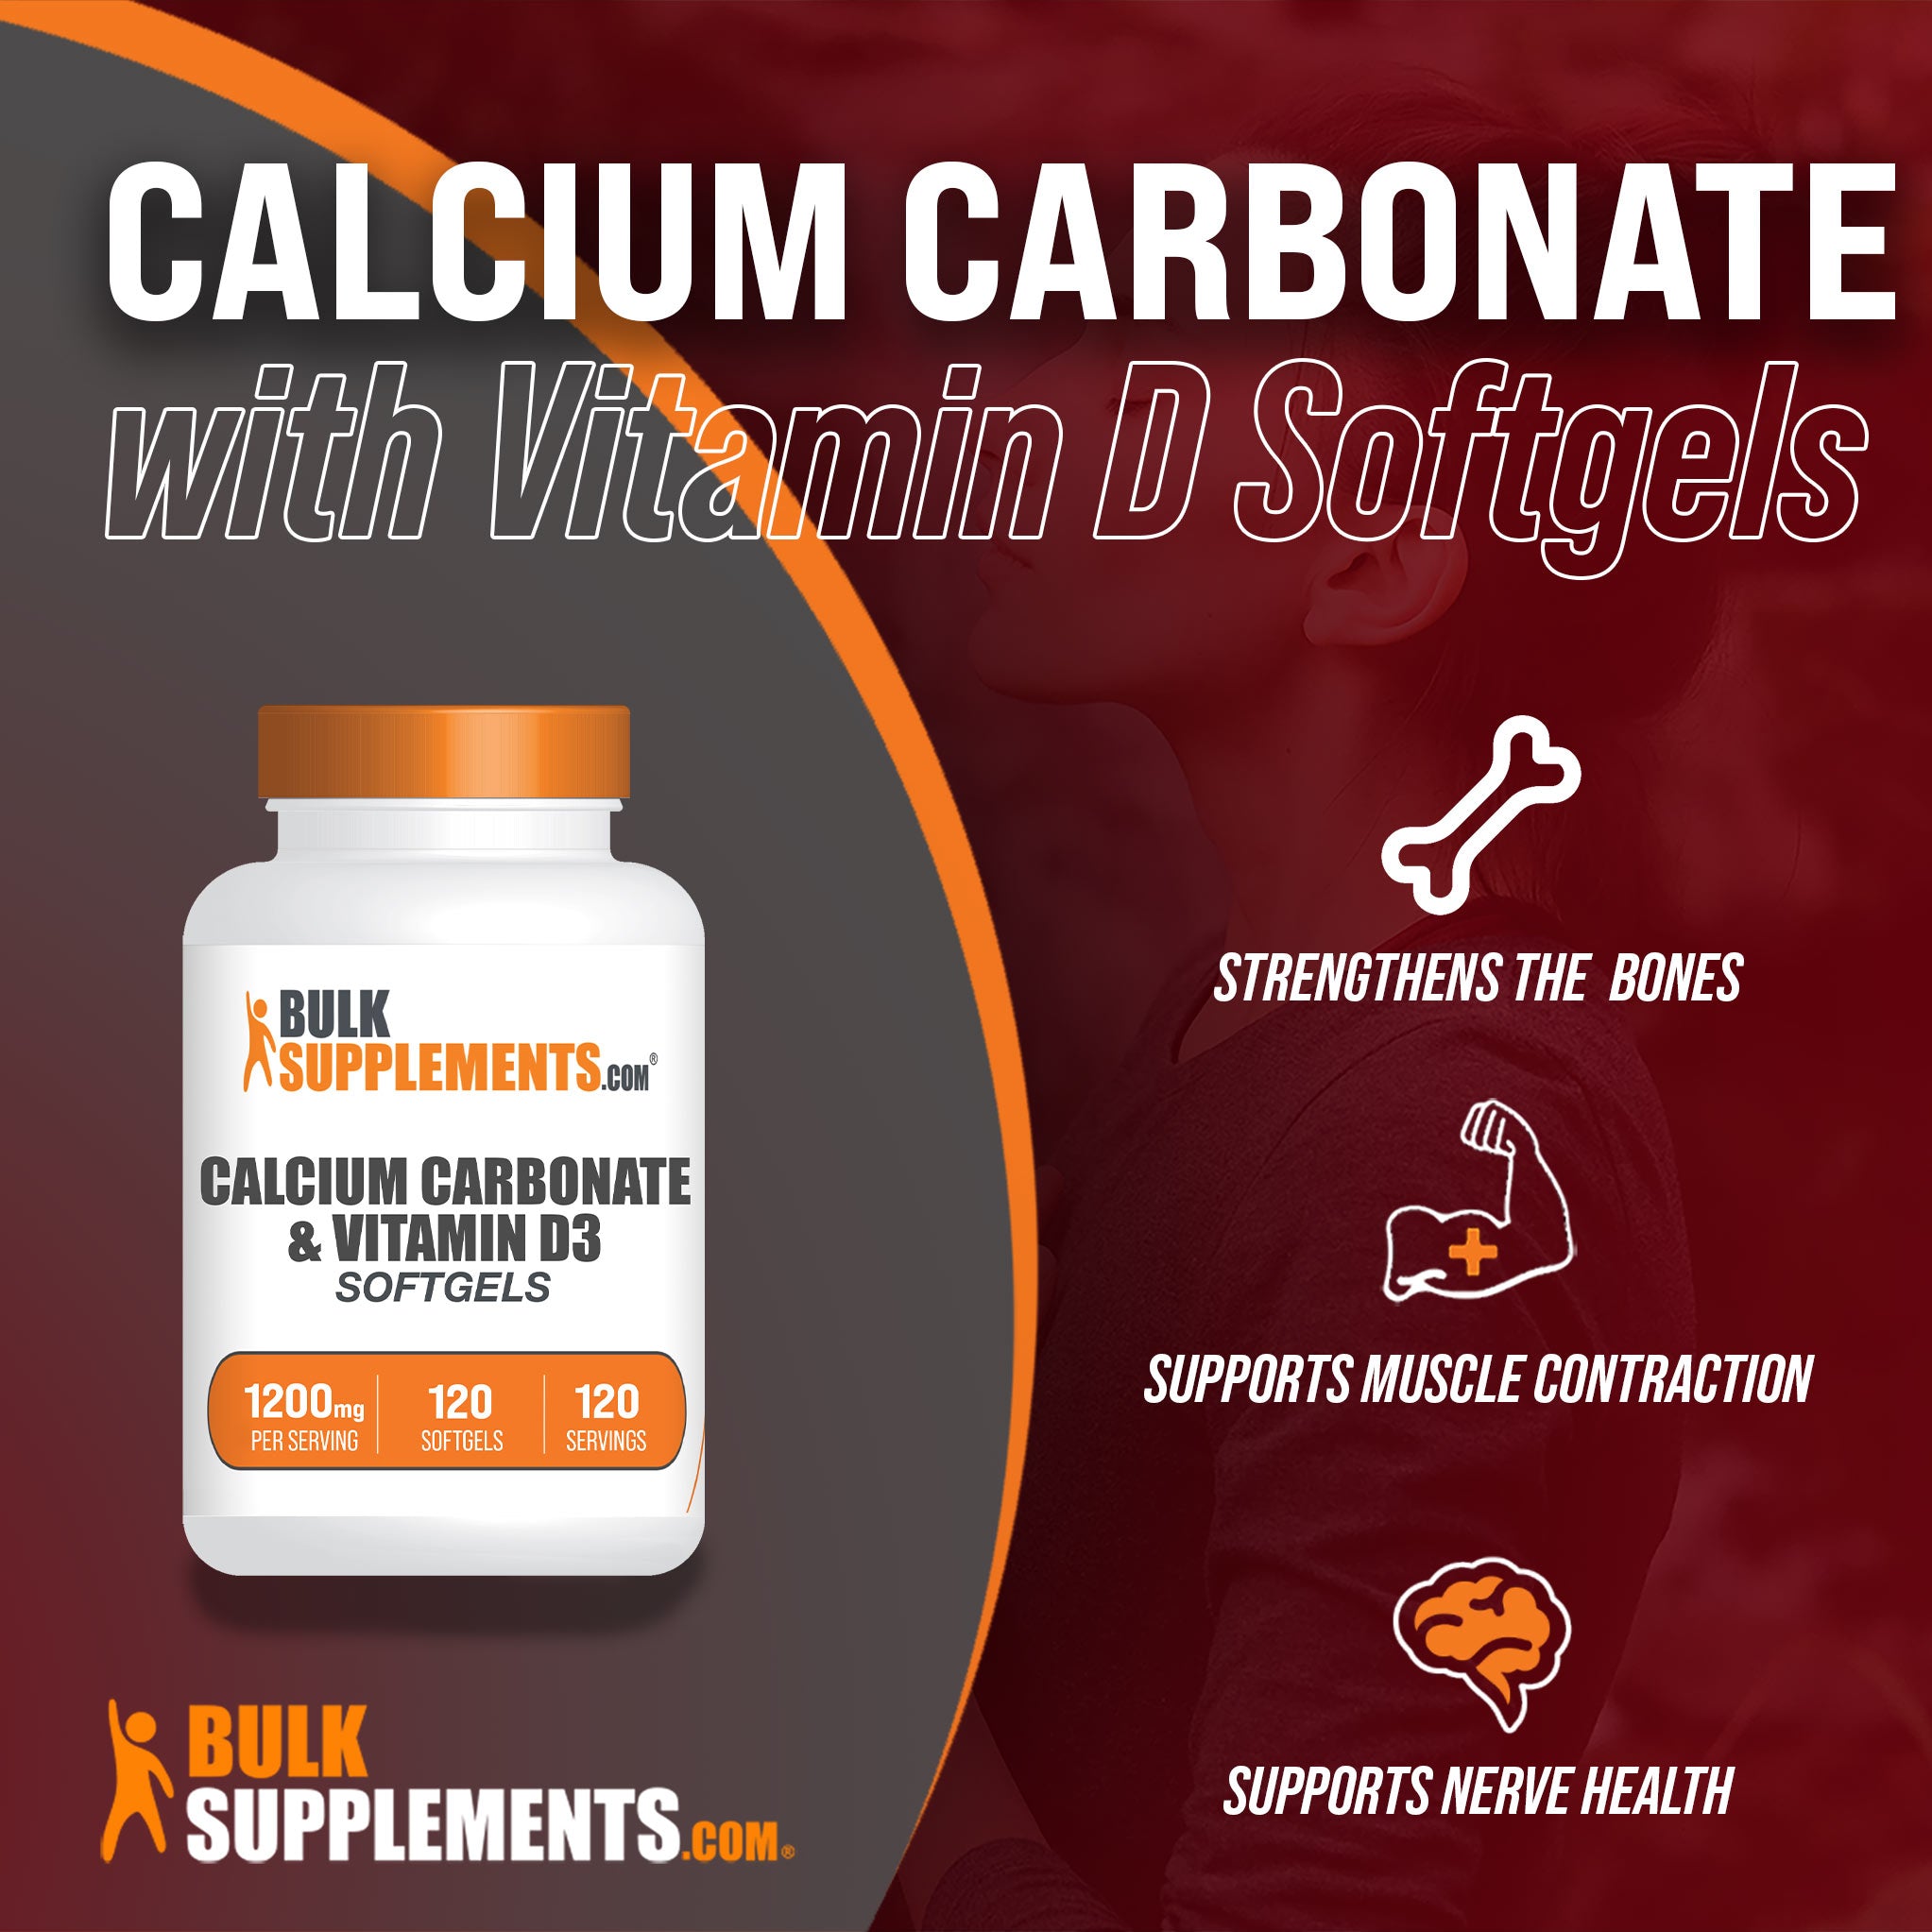 Benefits of Calcium Carbonate with Vitamin D Softgels; strengthen the bones; supports muscle contraction, supports nerve health